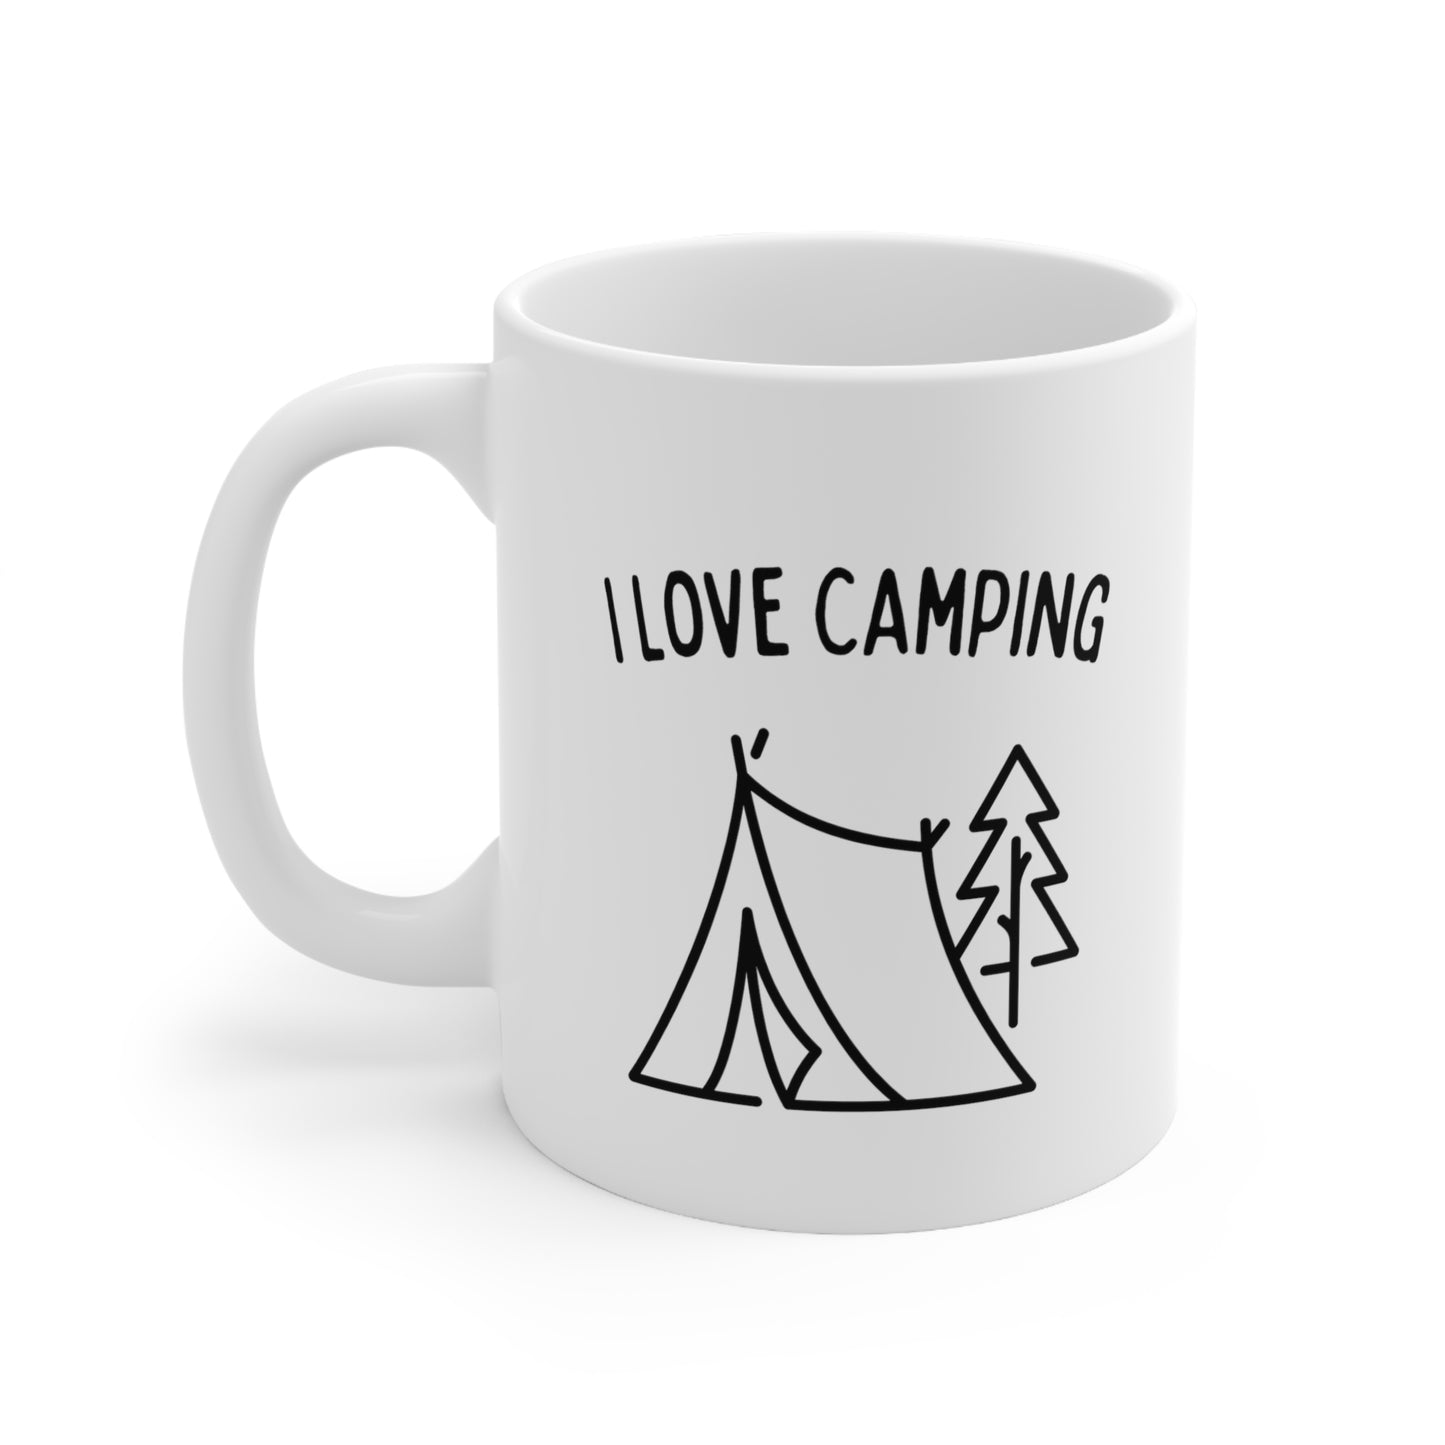 "I Love Camping" Coffee Mug - Weave Got Gifts - Unique Gifts You Won’t Find Anywhere Else!